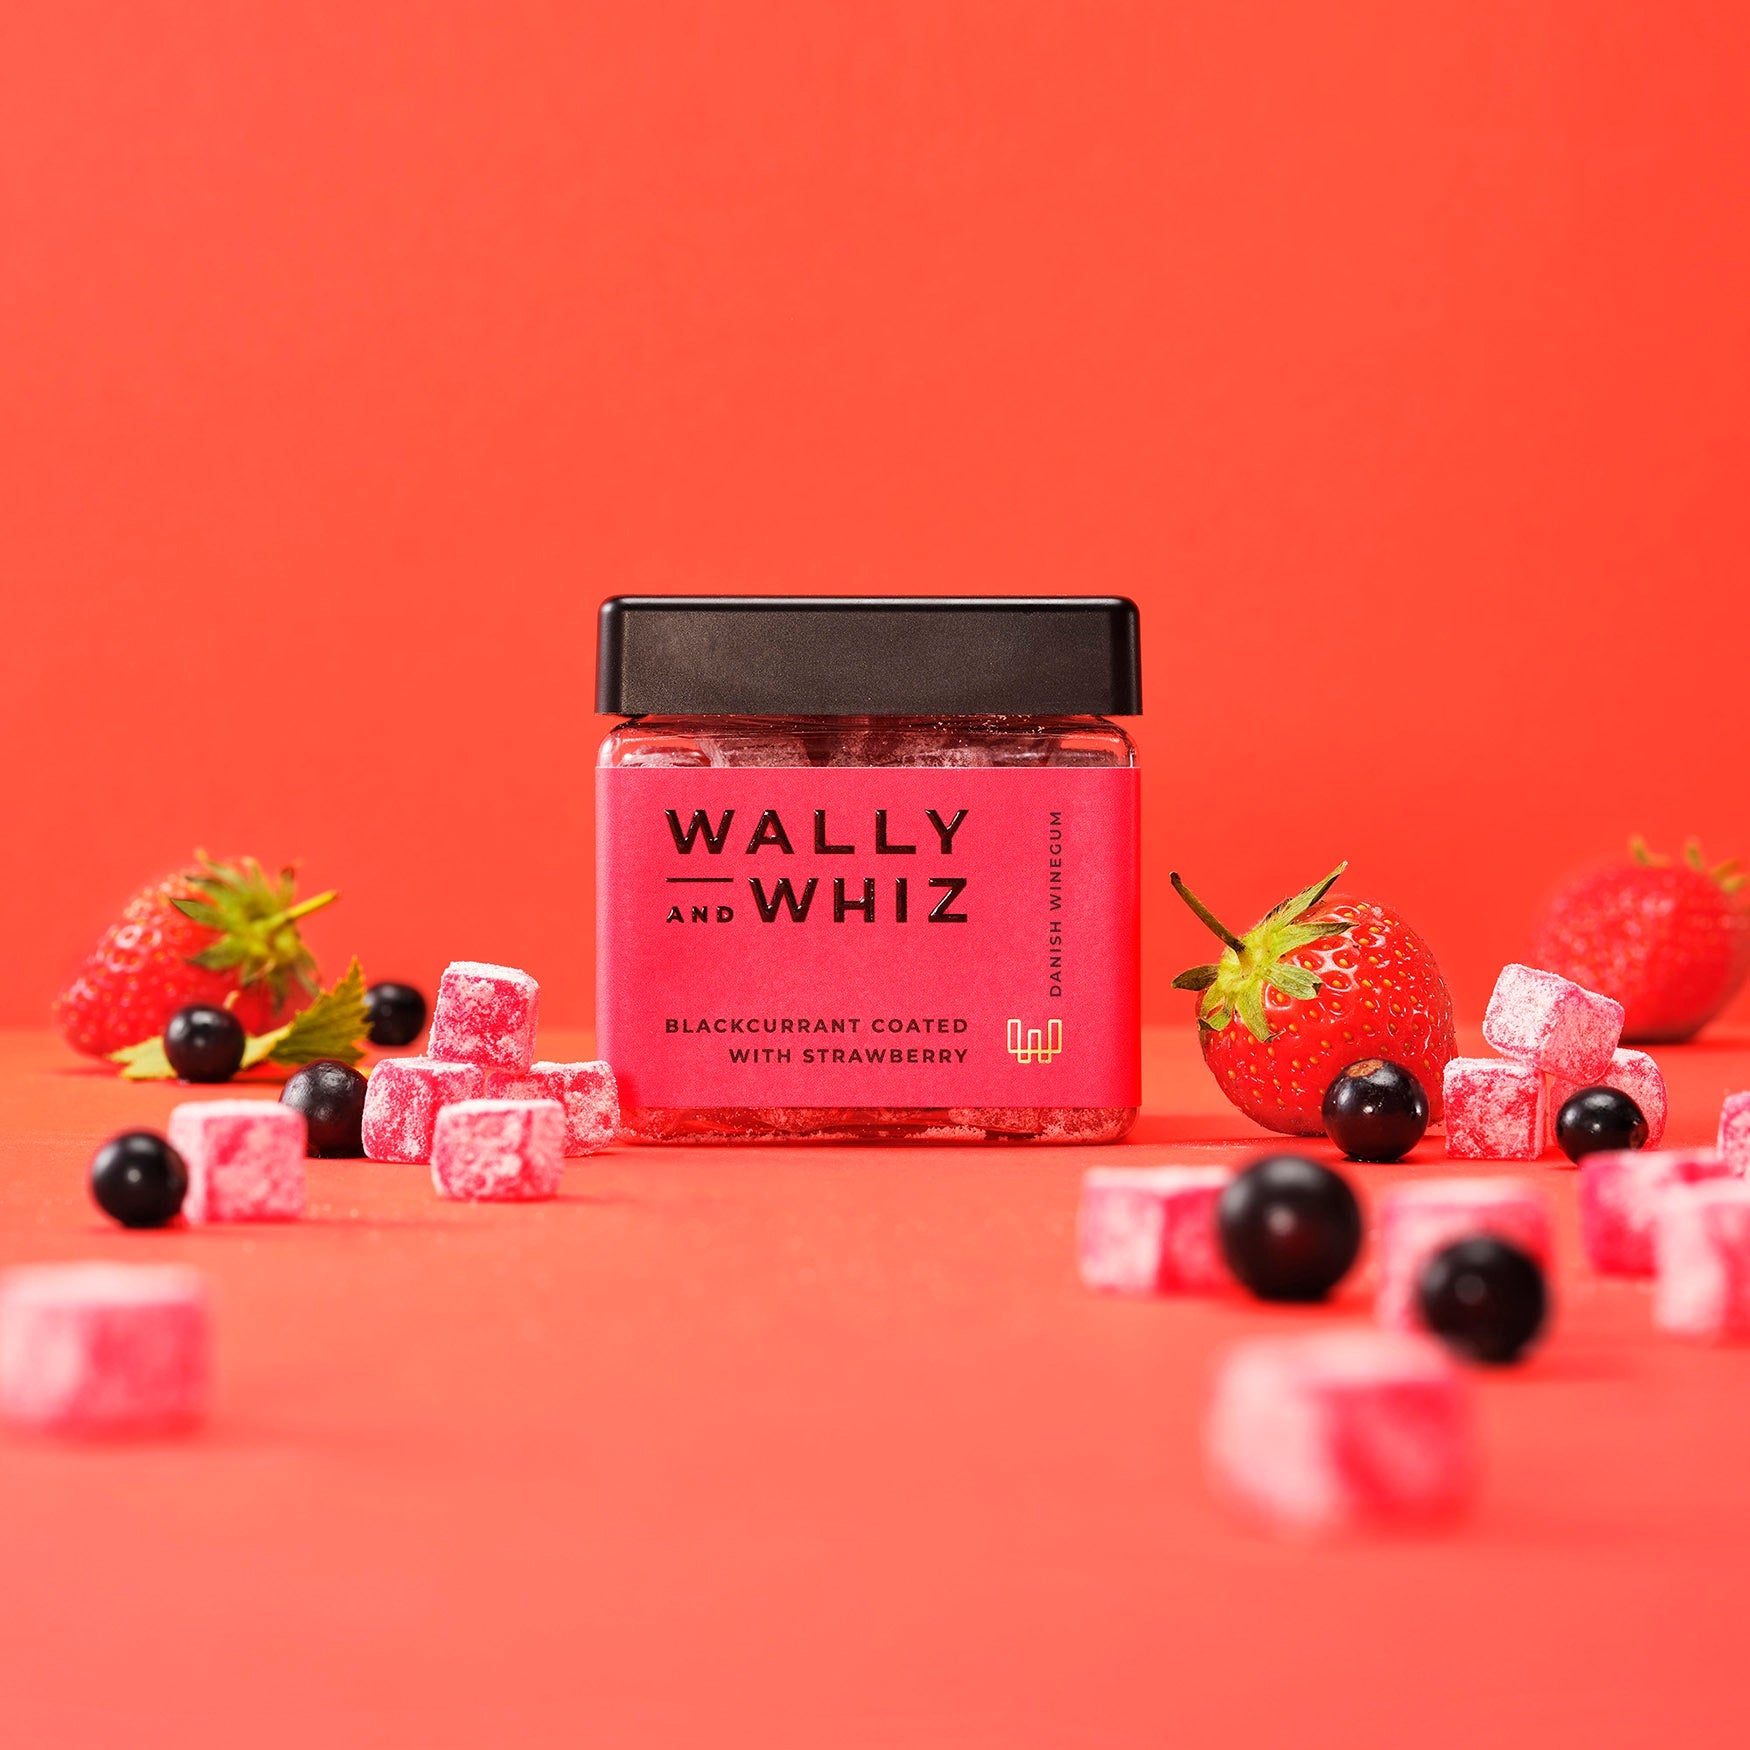 Blackcurrant with strawberry, 140g